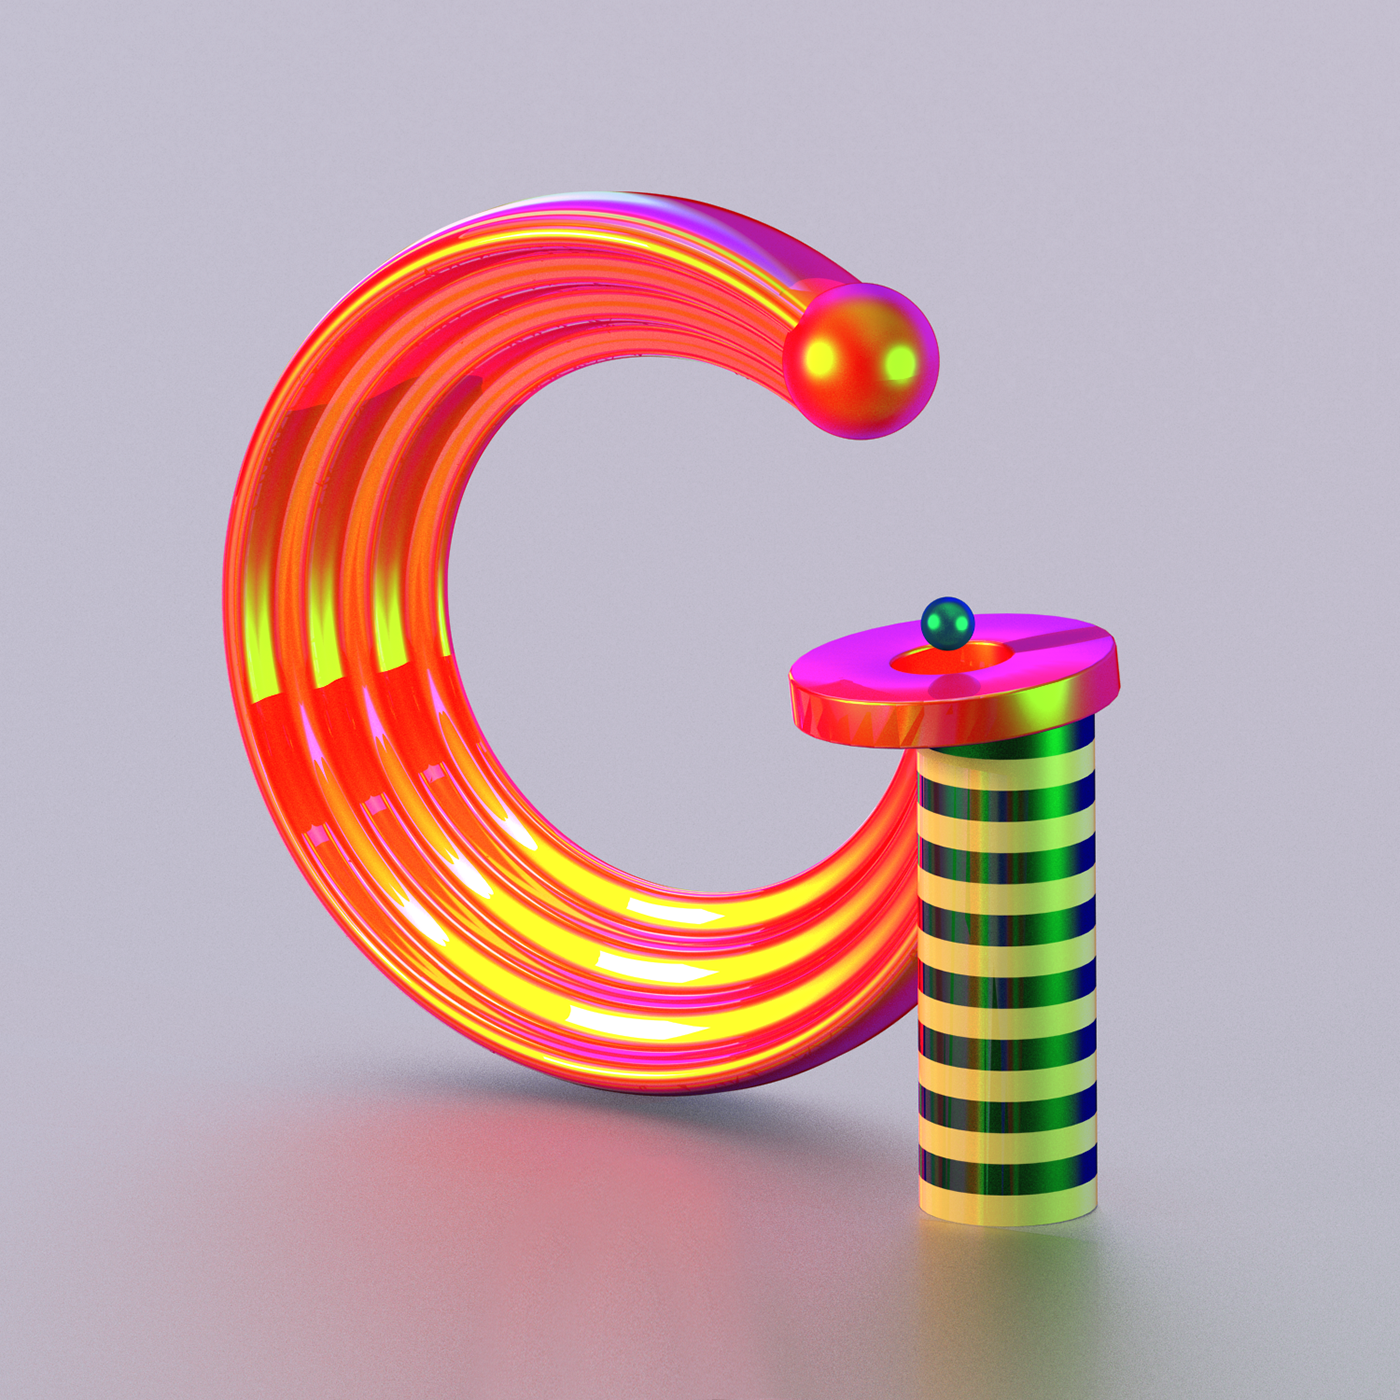 36days 36daysoftype 36 Days of Typ lettering 3D Type 3d art 3d letters digital lettering digital type El Salvador ivan castro letras letters #36daysoftype